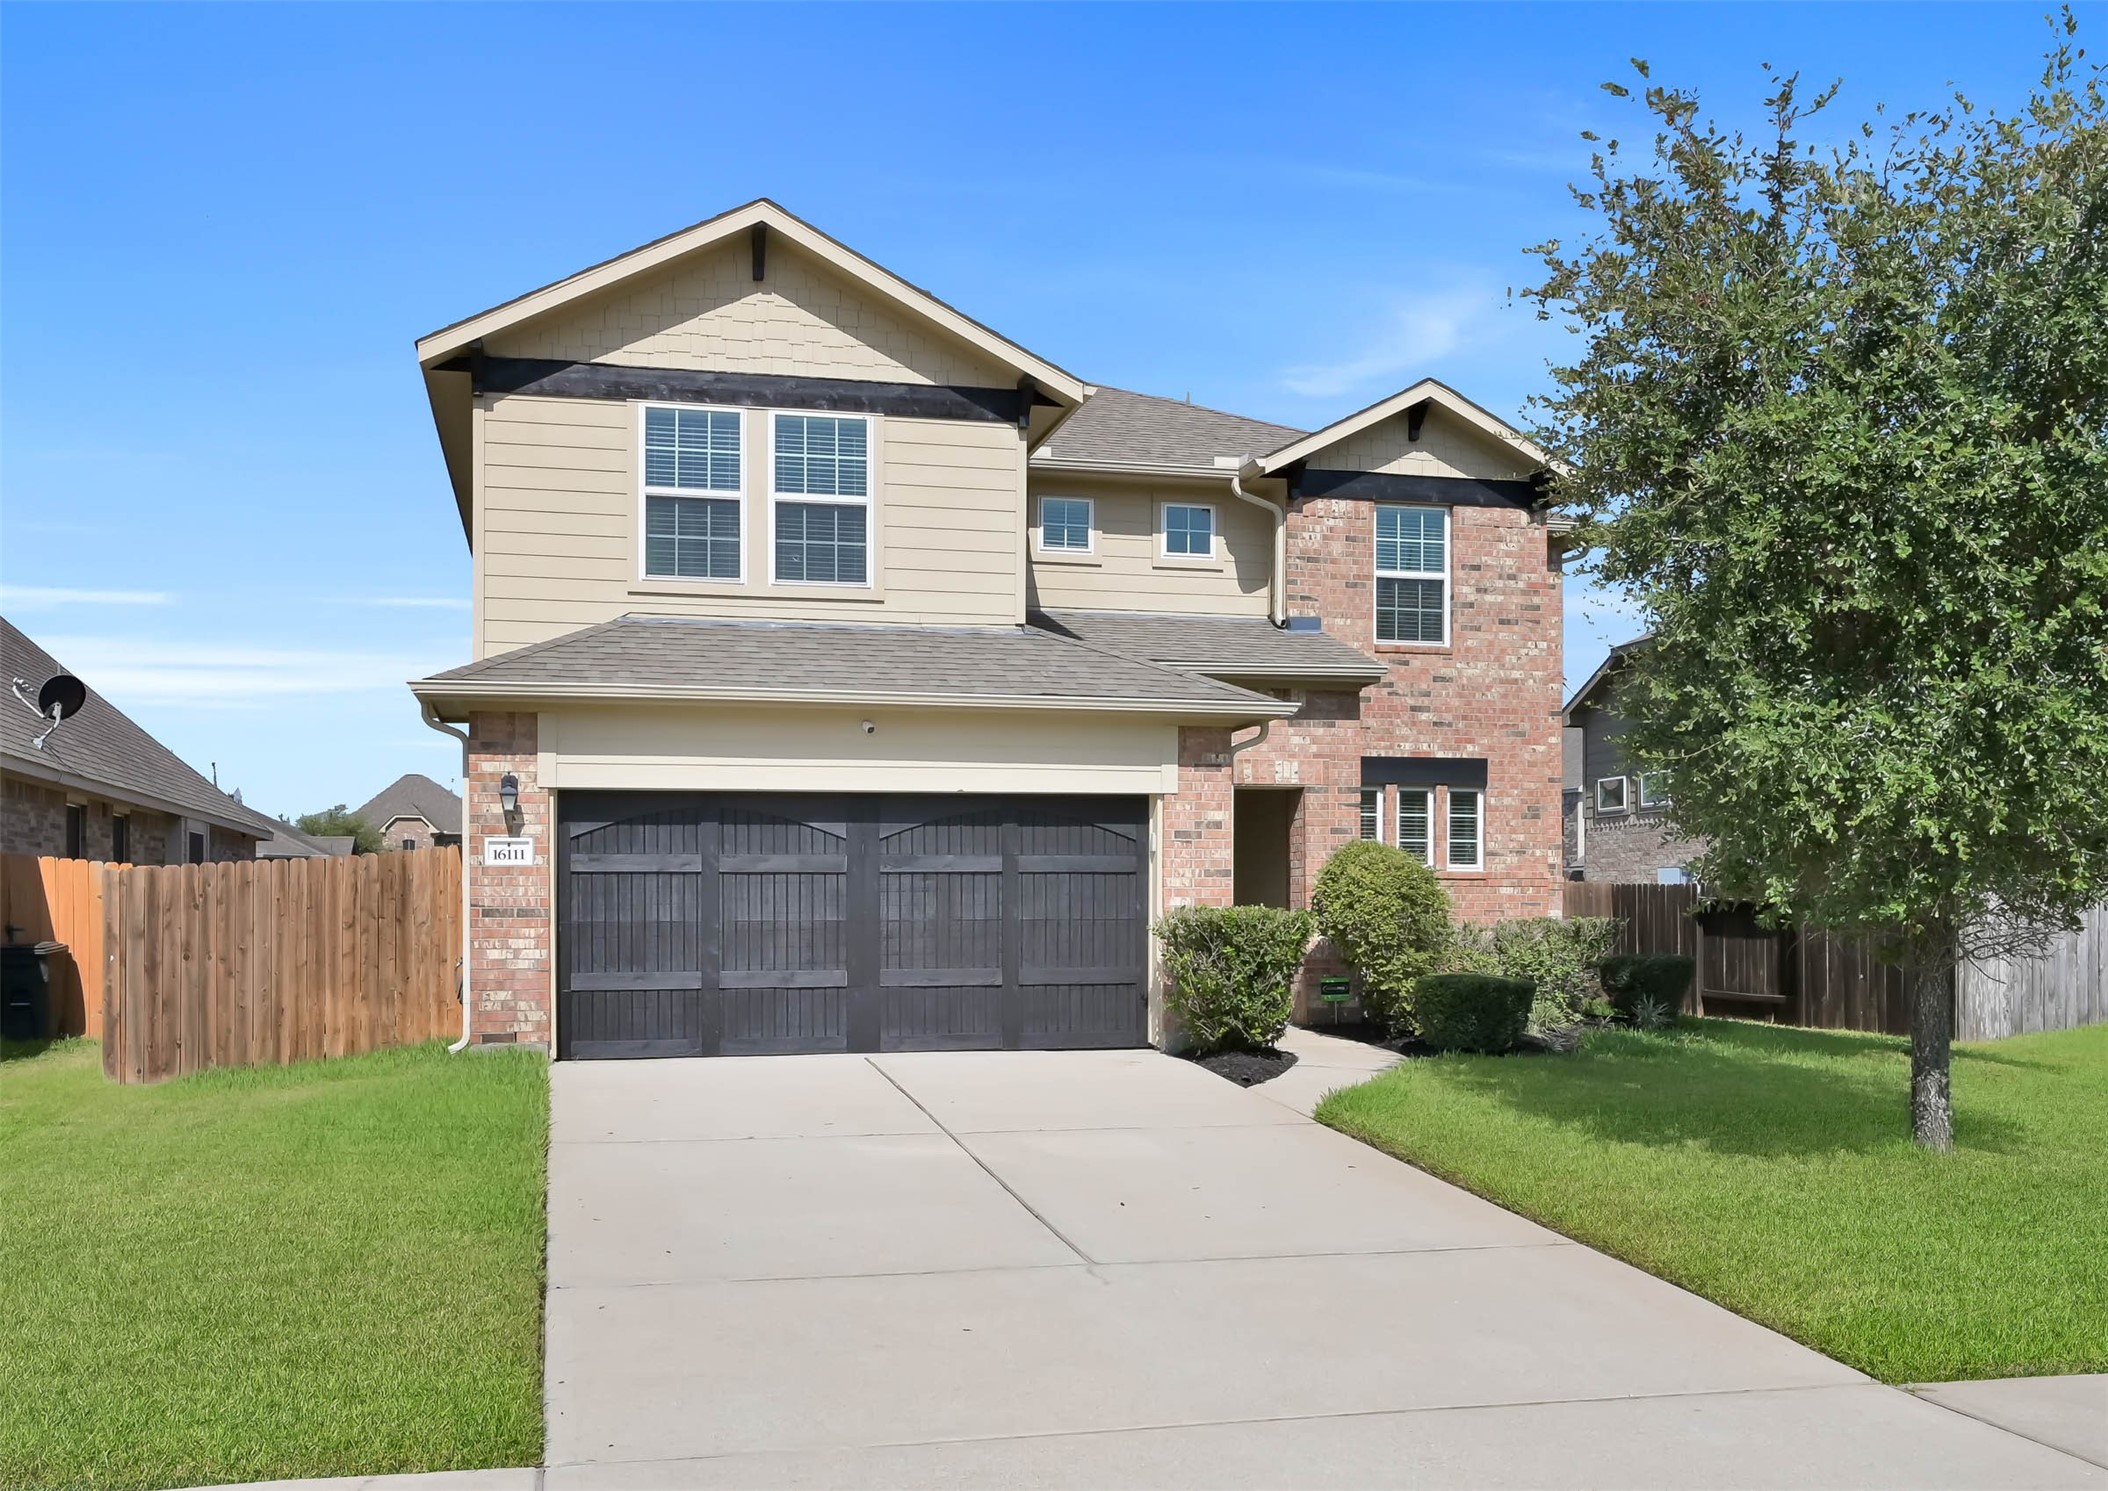 16111 Laura Beth in Stone Creek Ranch. Offering over 2600 square feet that is spacious, open and inviting. A special bonus is the central vacuum system installed in the home!